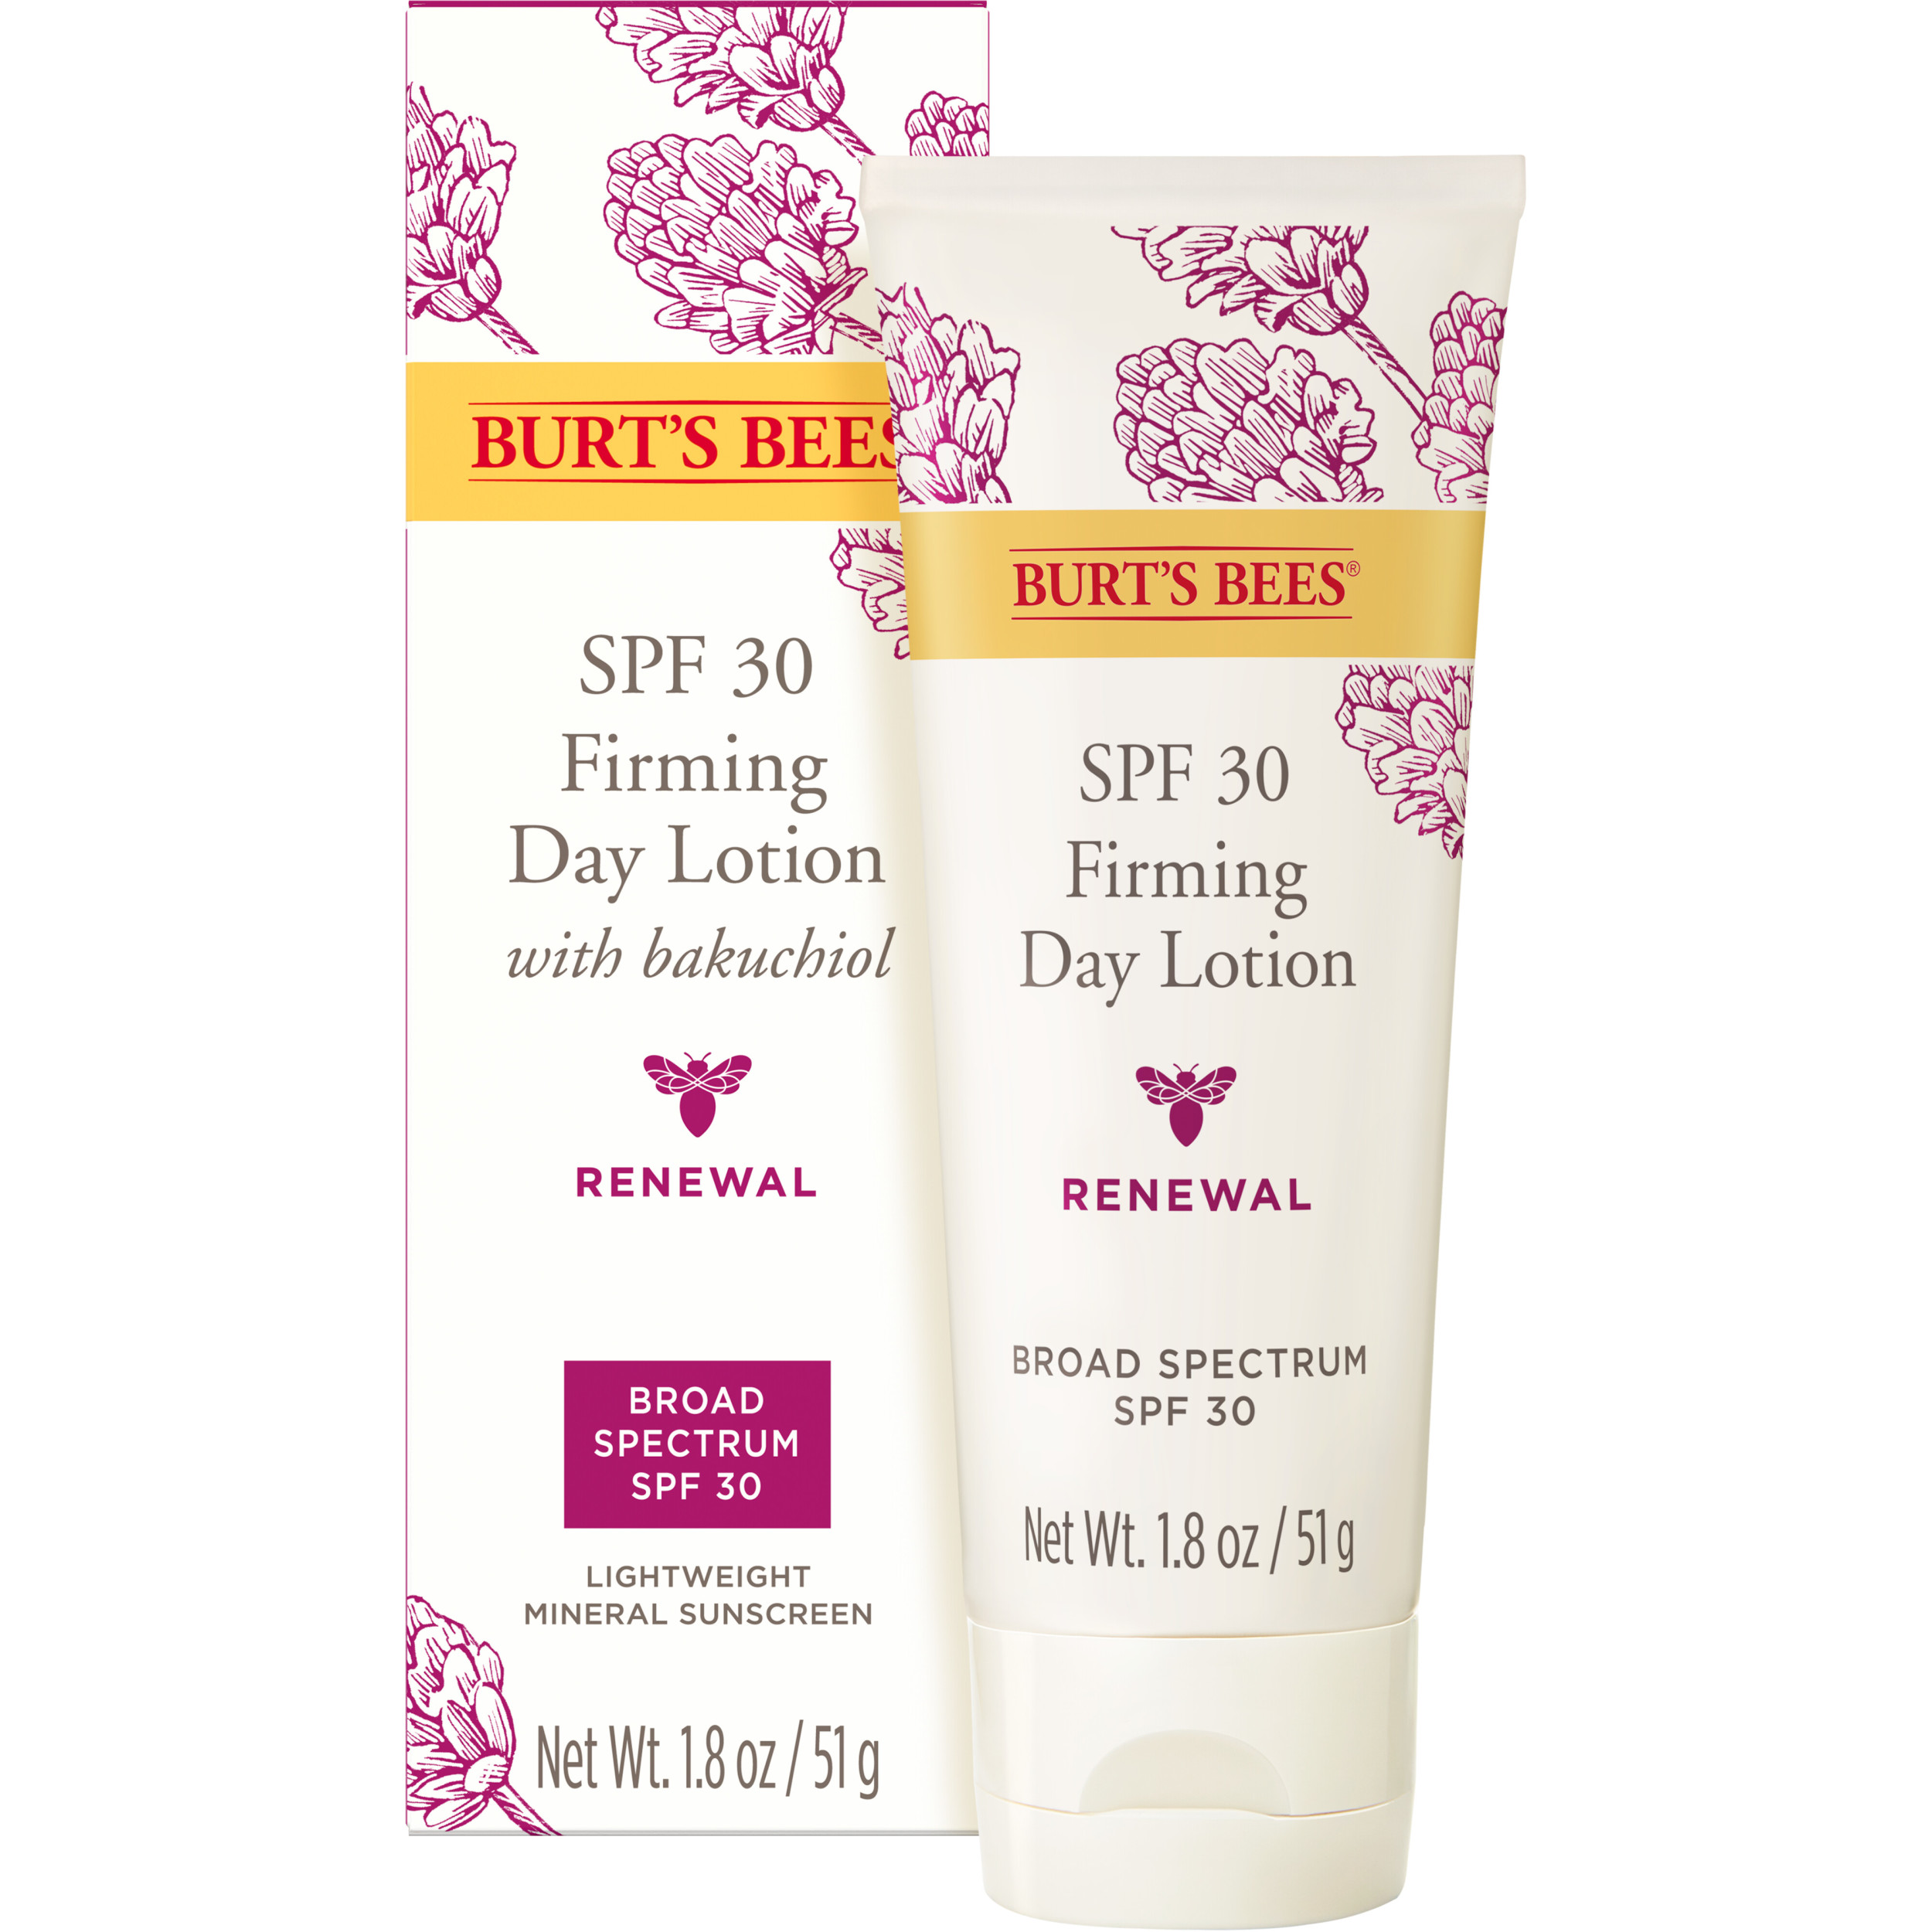 Burt's Bees Renewal Firming Day Lotion, SPF 30, 1.8 oz - image 1 of 10